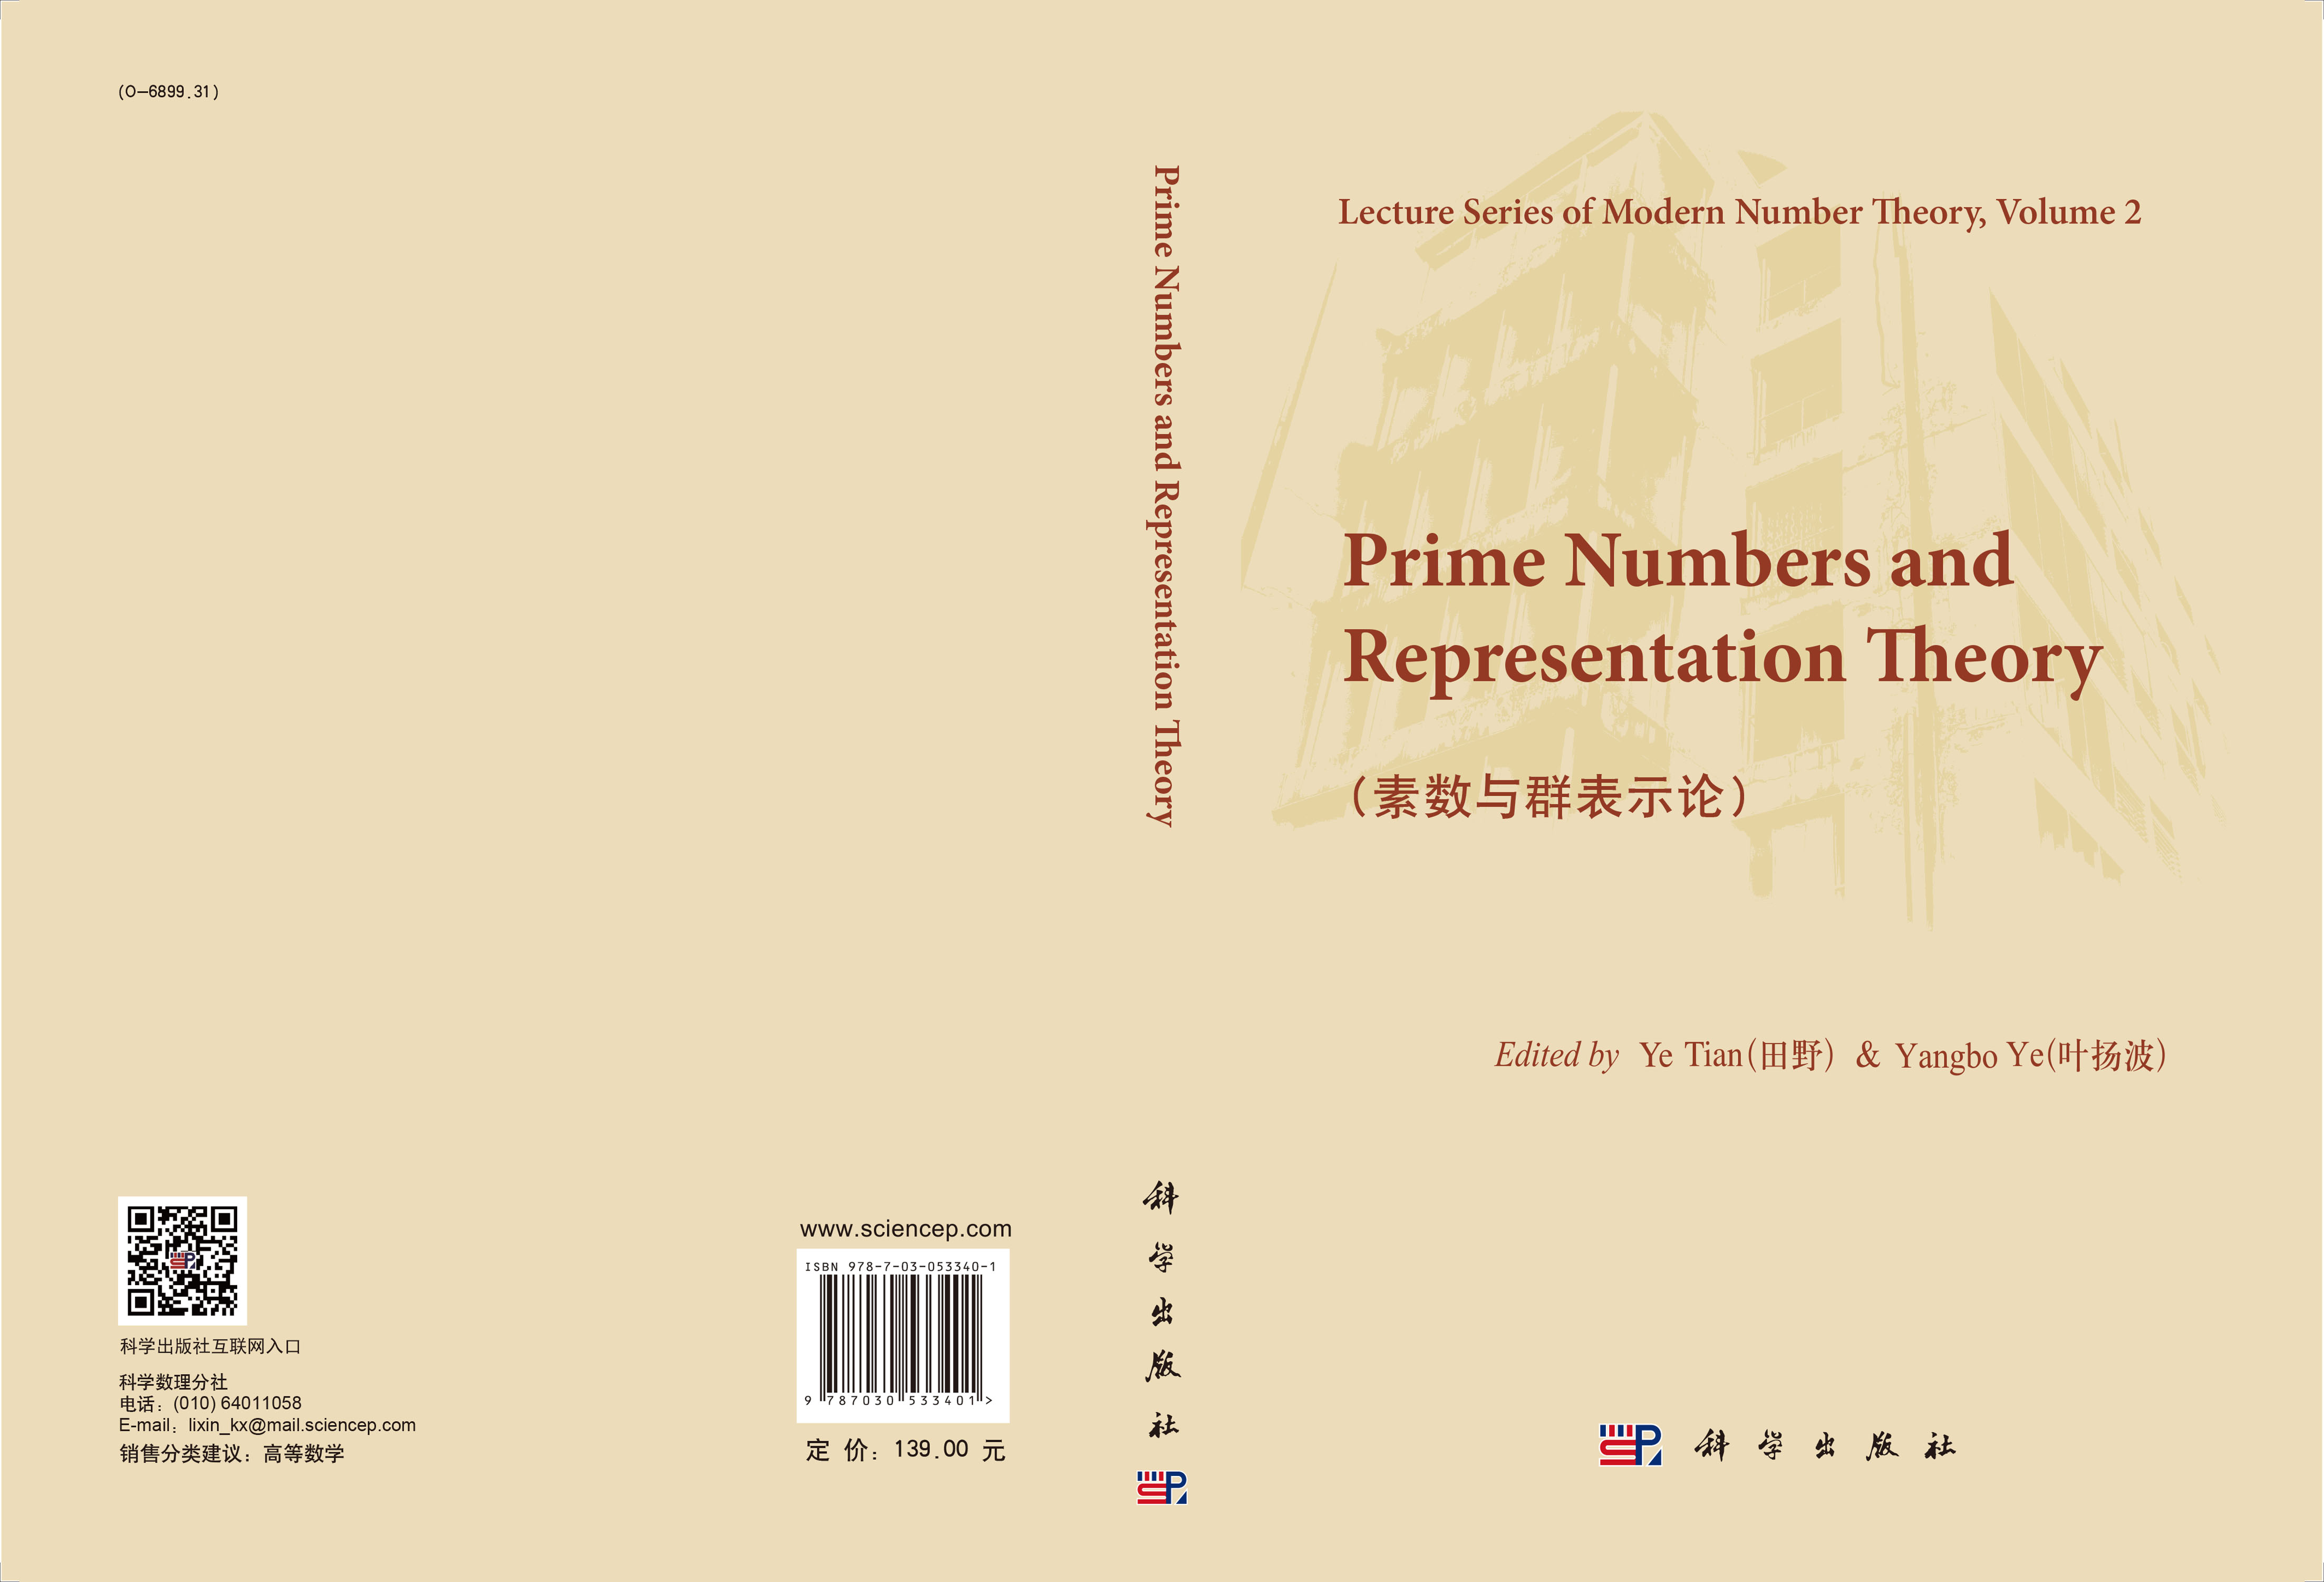 Prime Numbers and Representation Theory（素数与群表示论）